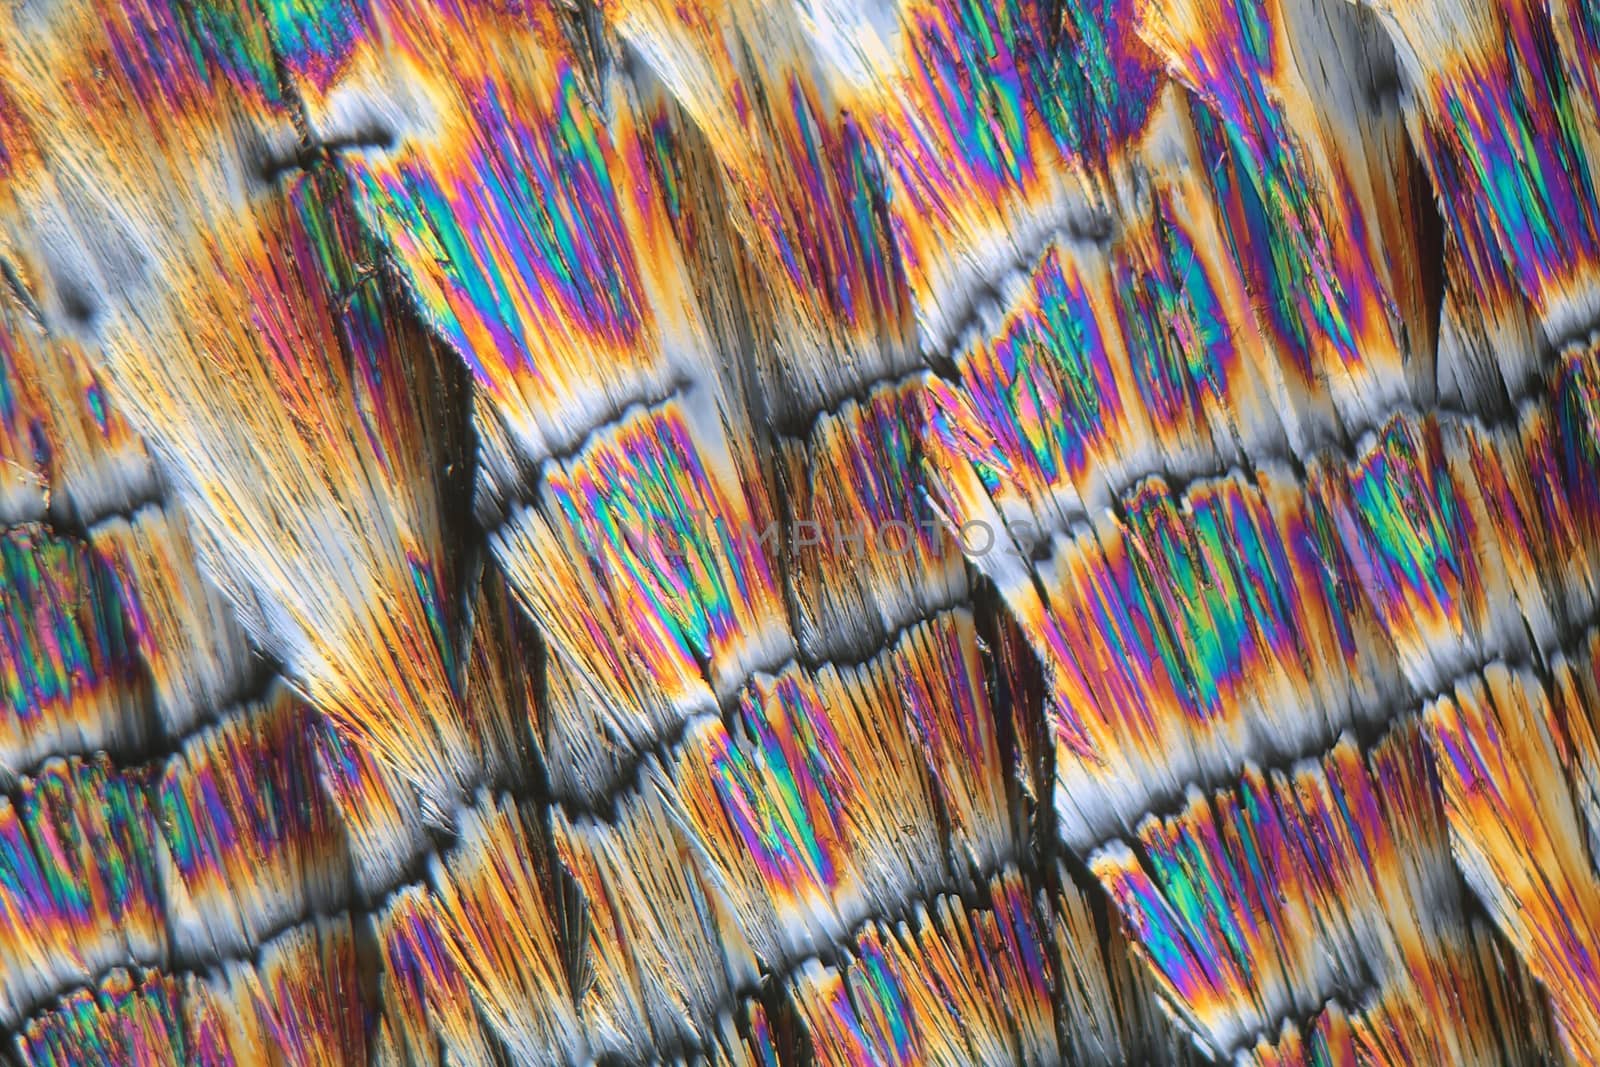 Vitamin B crystals under the microscope (magnification 80x and polarized light).